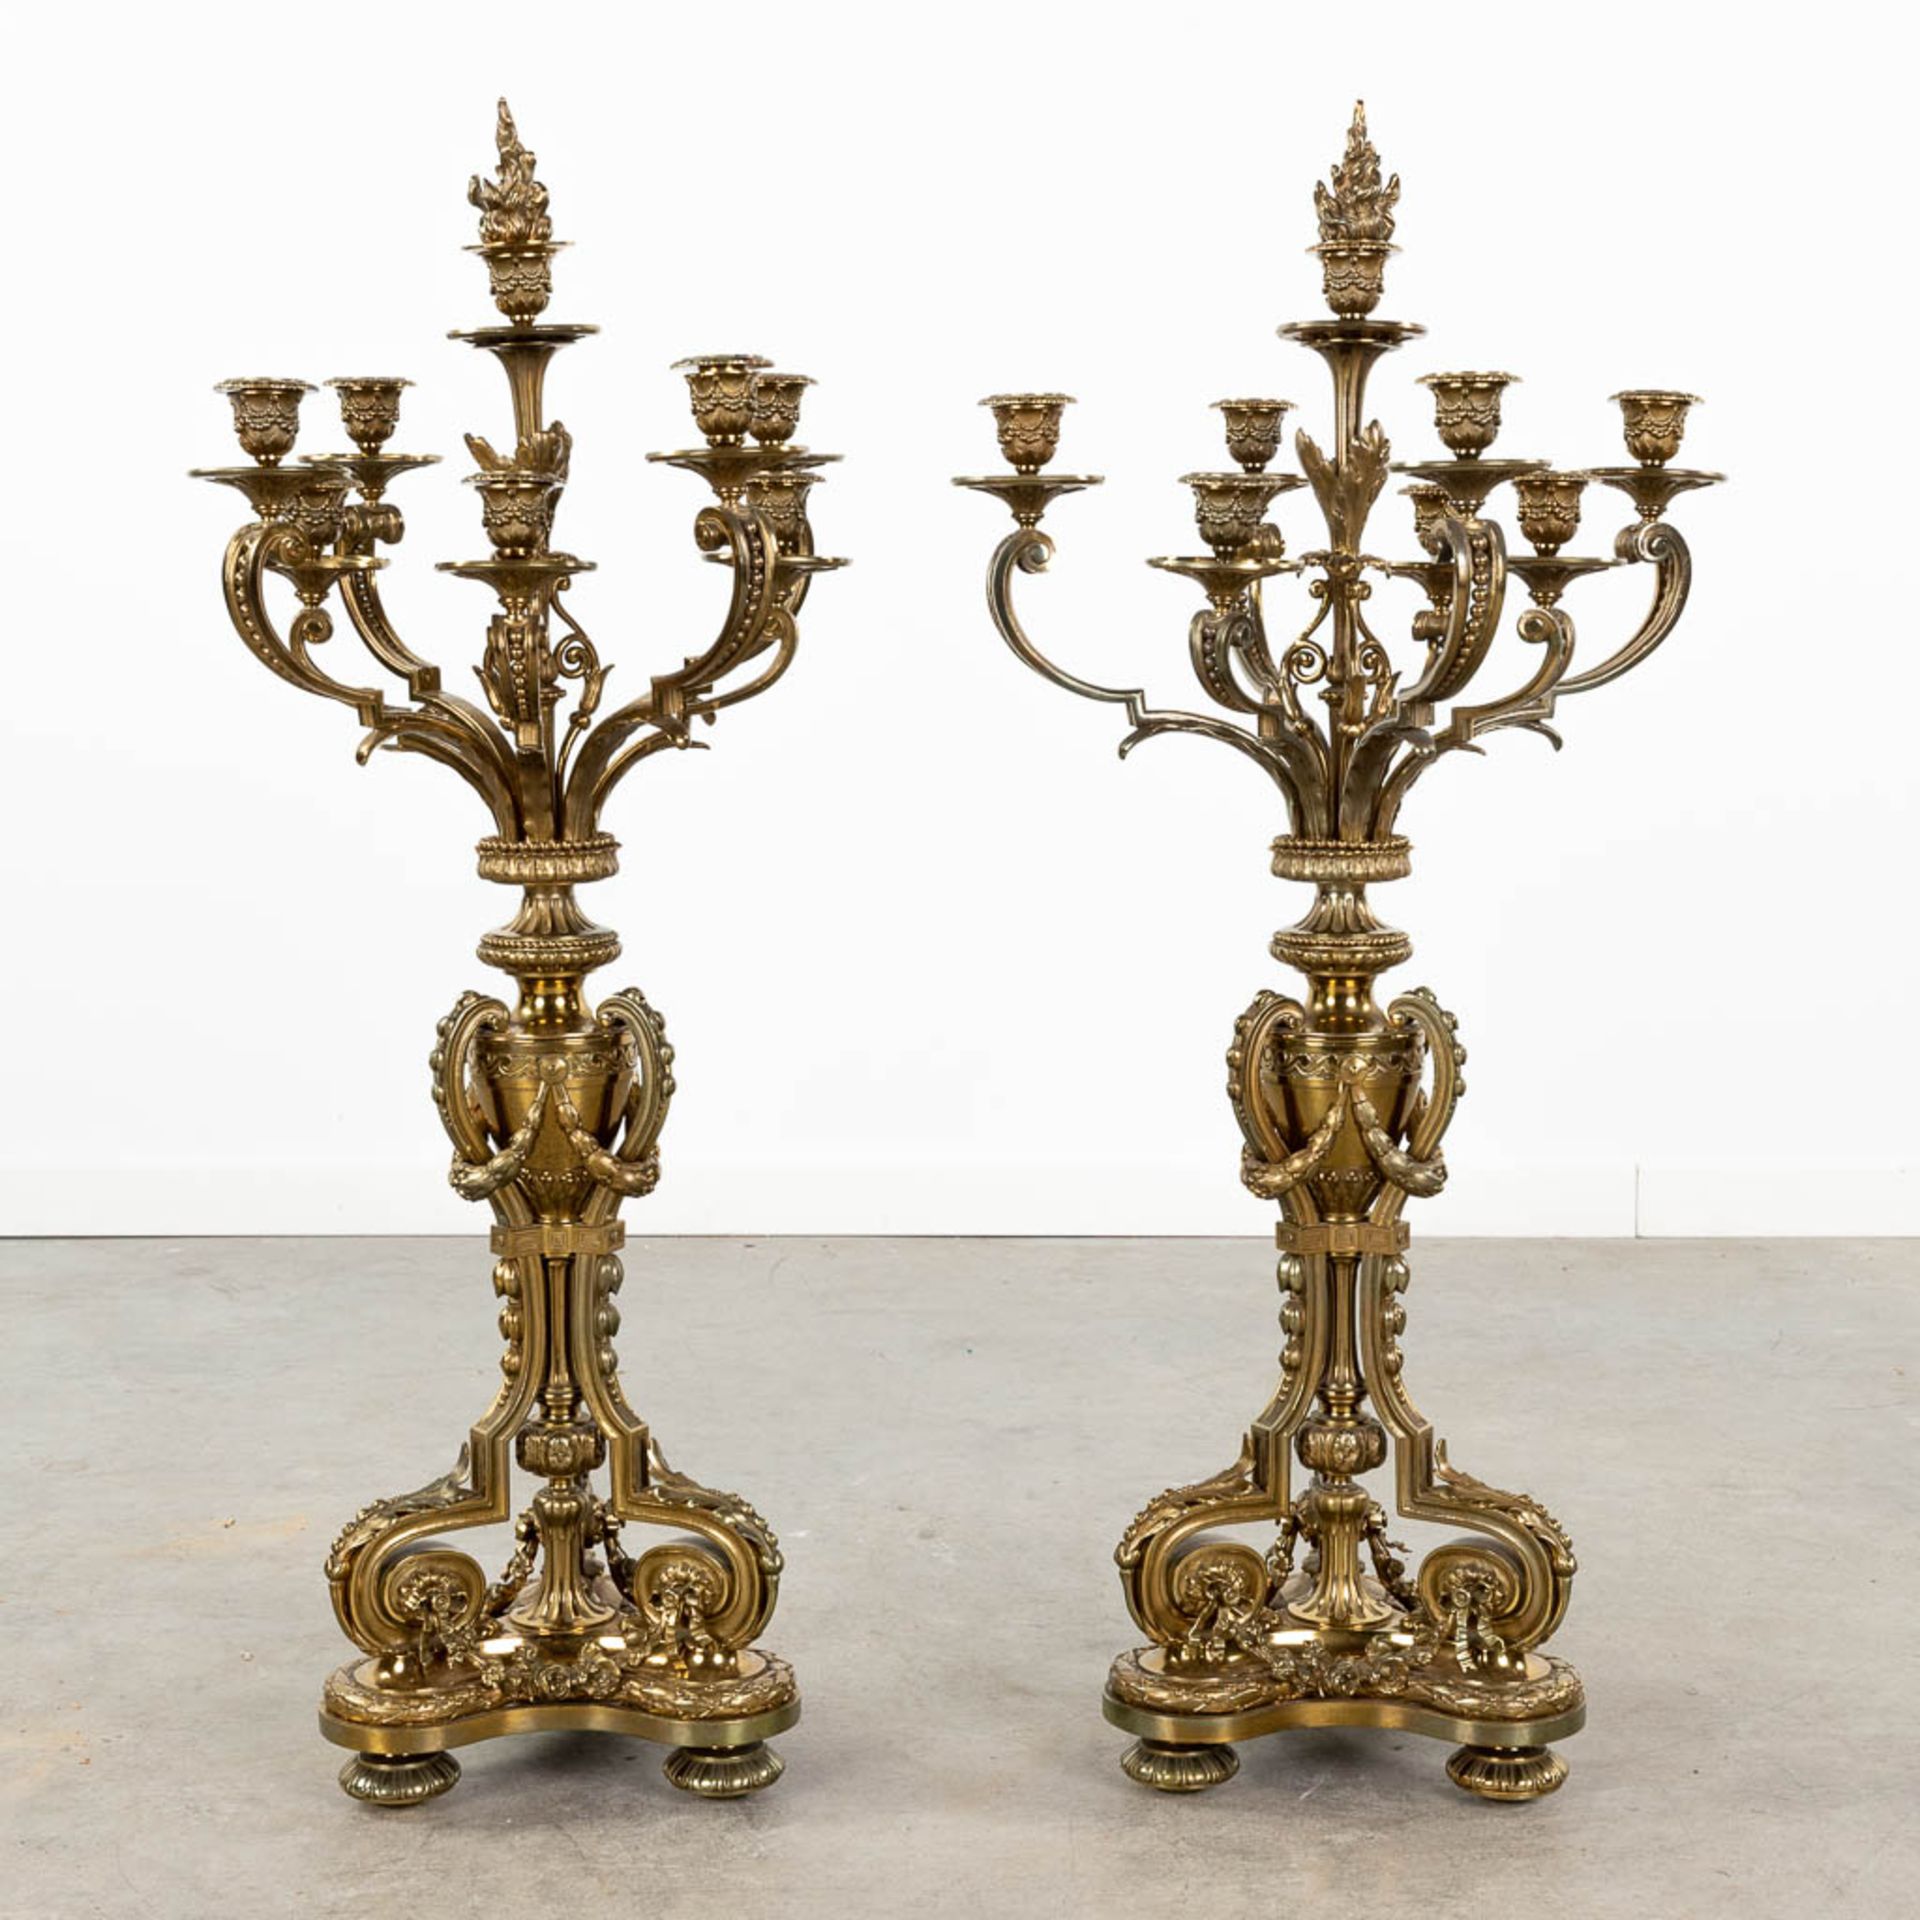 A pair of large neoclassical candelabra made of polished bronze. (L:30 x W:30 x H:90 x D:42,5 cm)